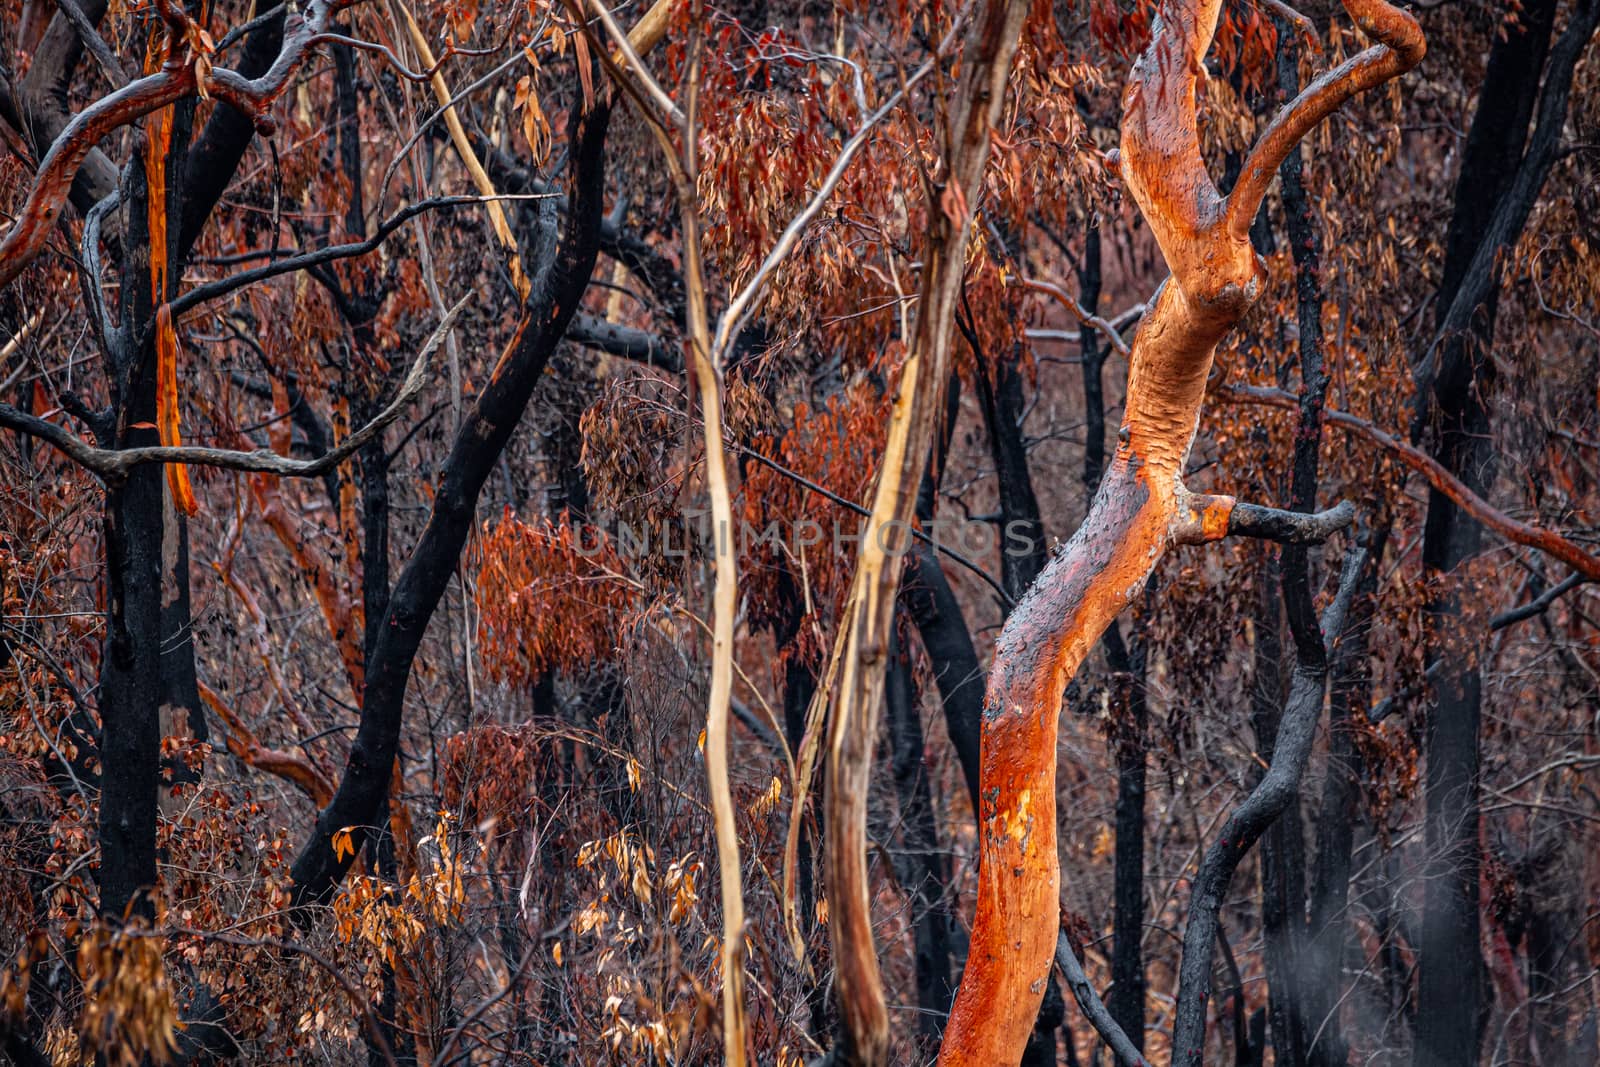 Burnt and charred bush land in Australia after bush fires by lovleah